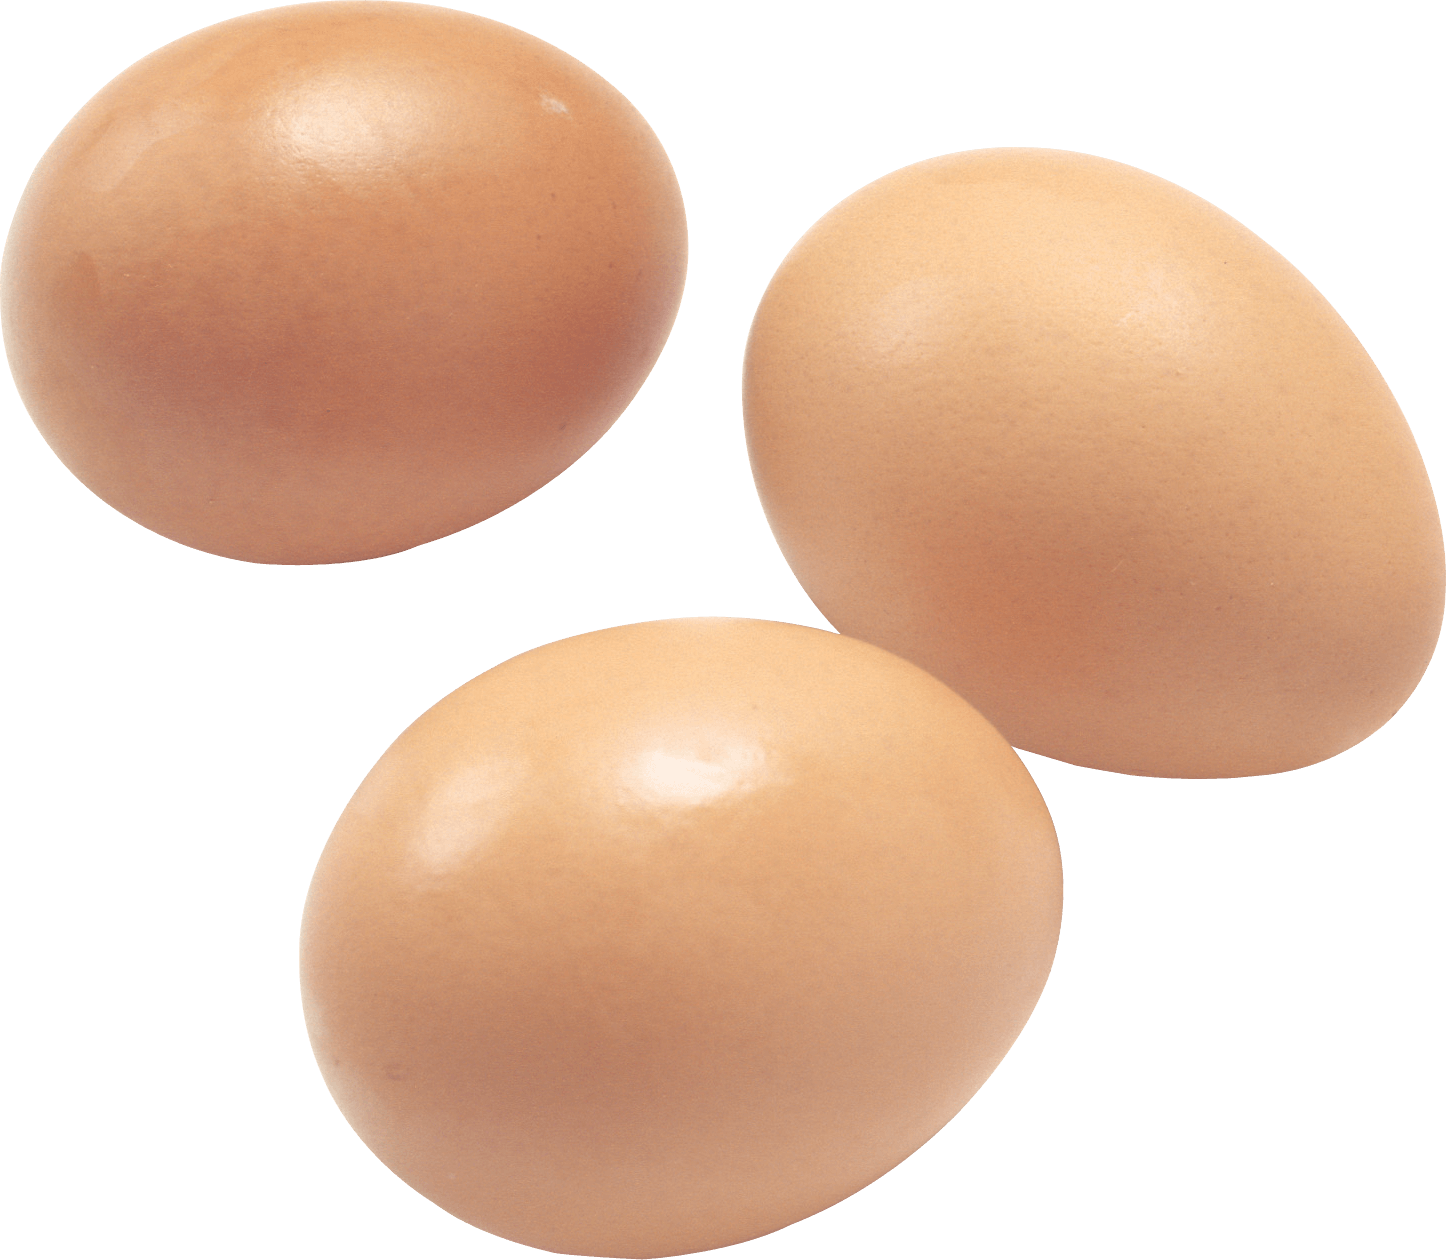 Eggs Png Image PNG Image